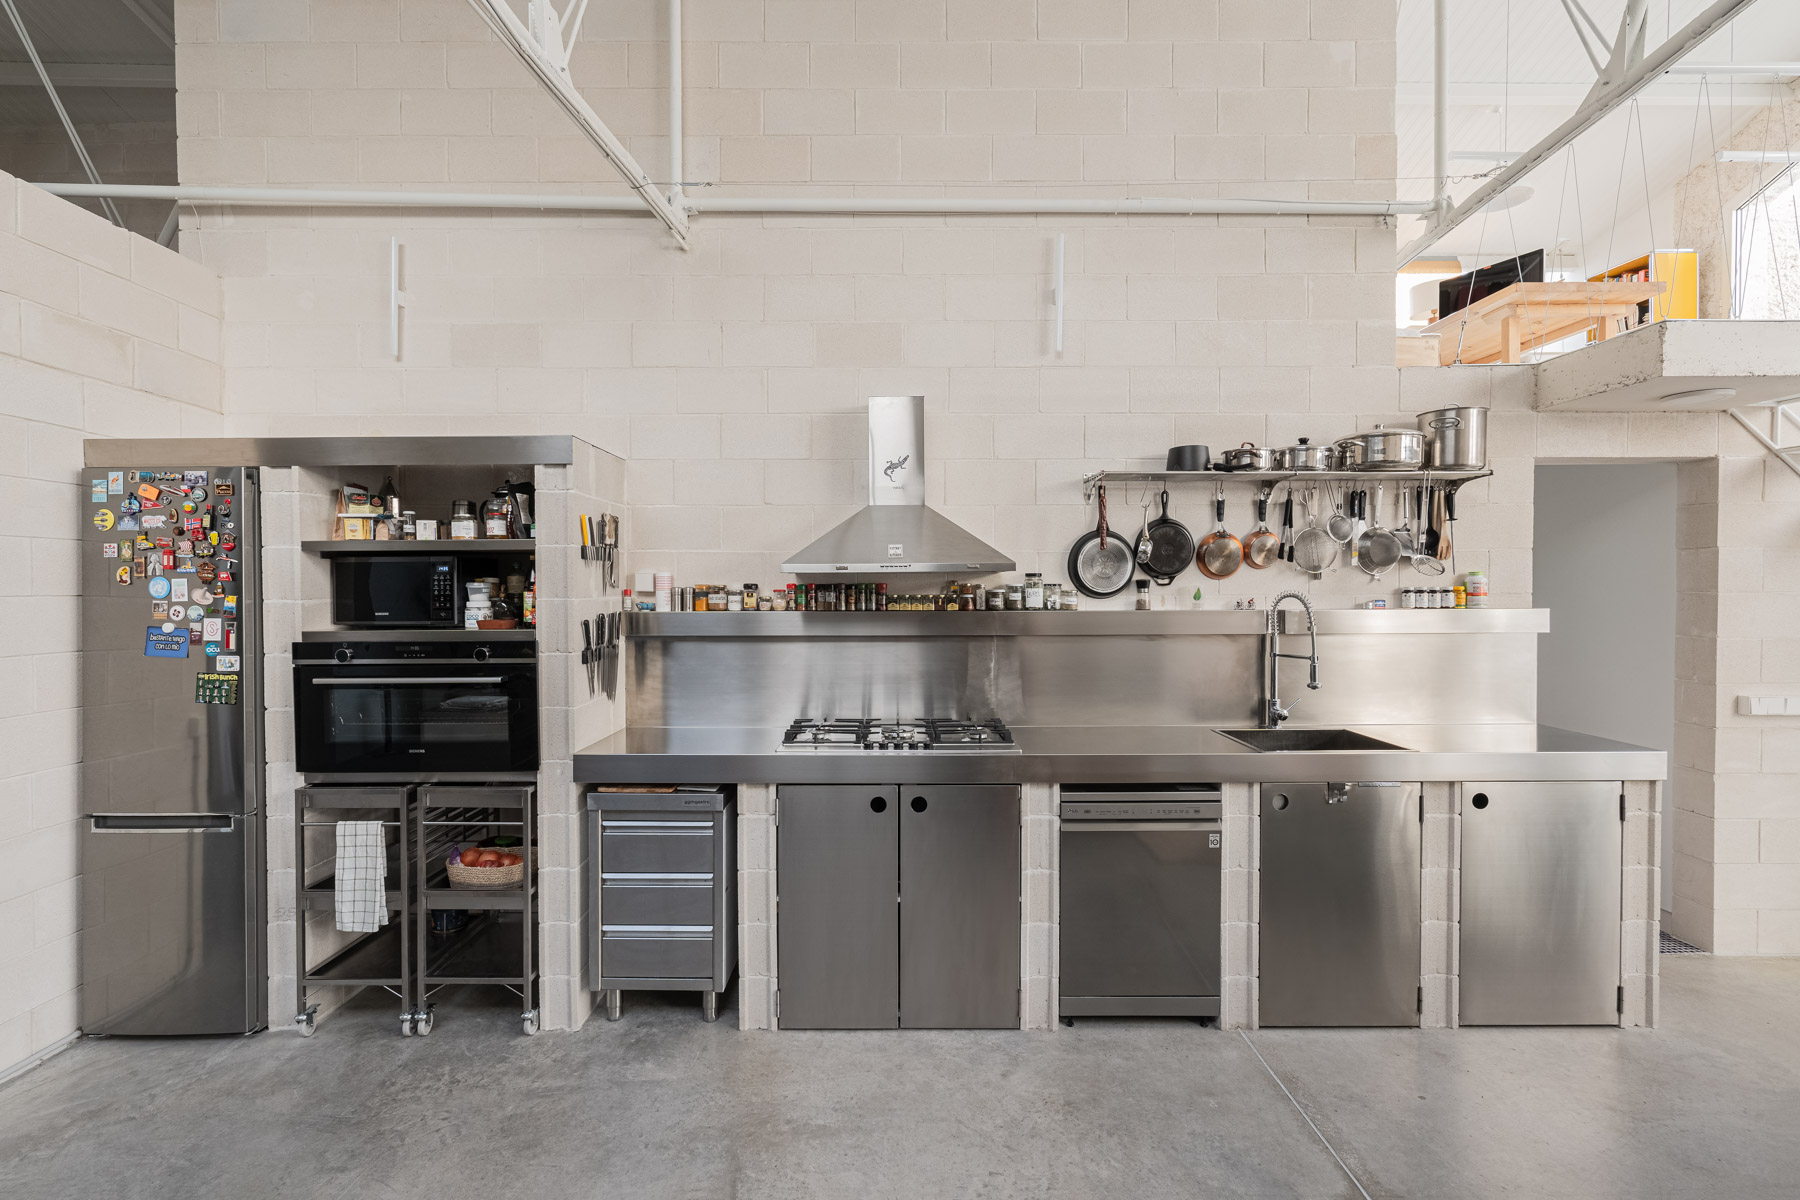 The kitchen at BlasÃ³n is stainless steel